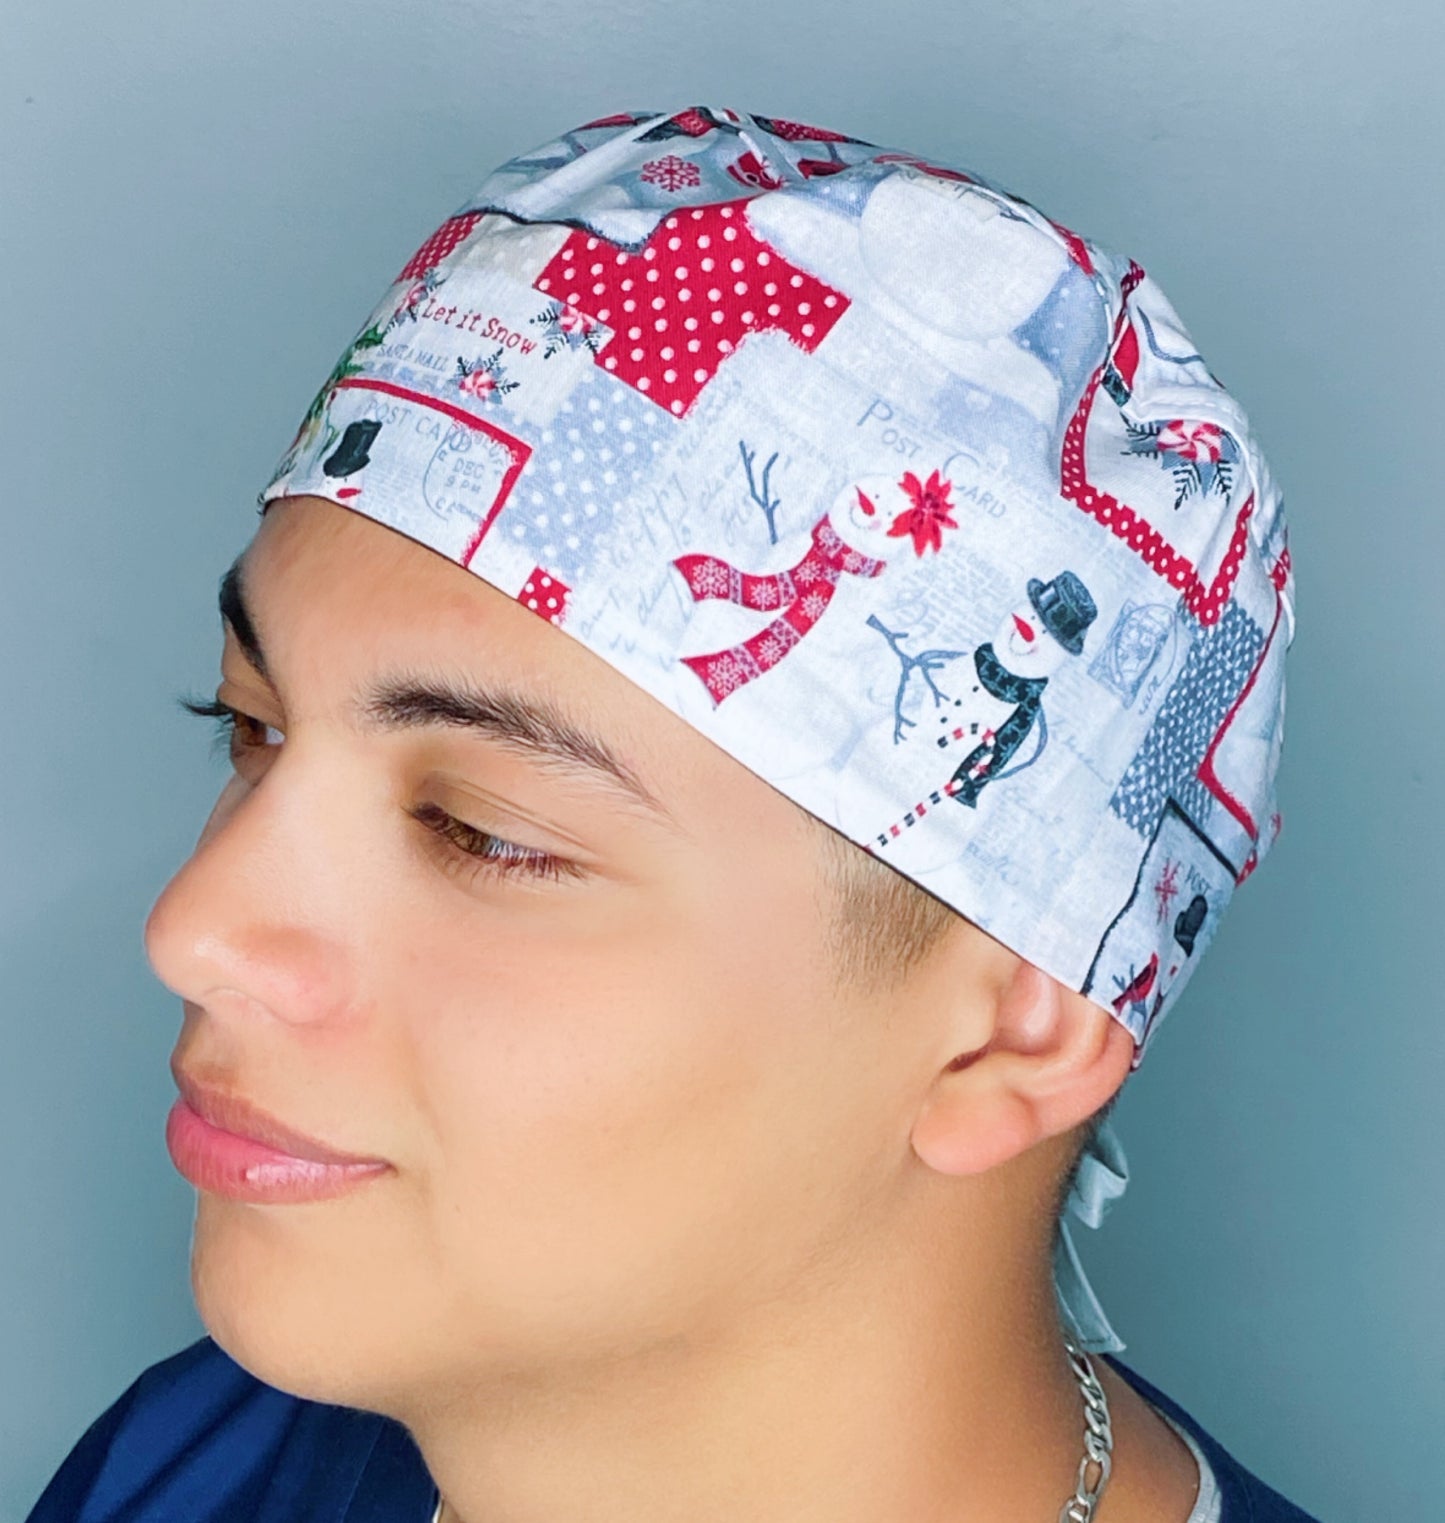 Let it Snow Post Card Mail Christmas/Winter themed Unisex Holiday Scrub Cap